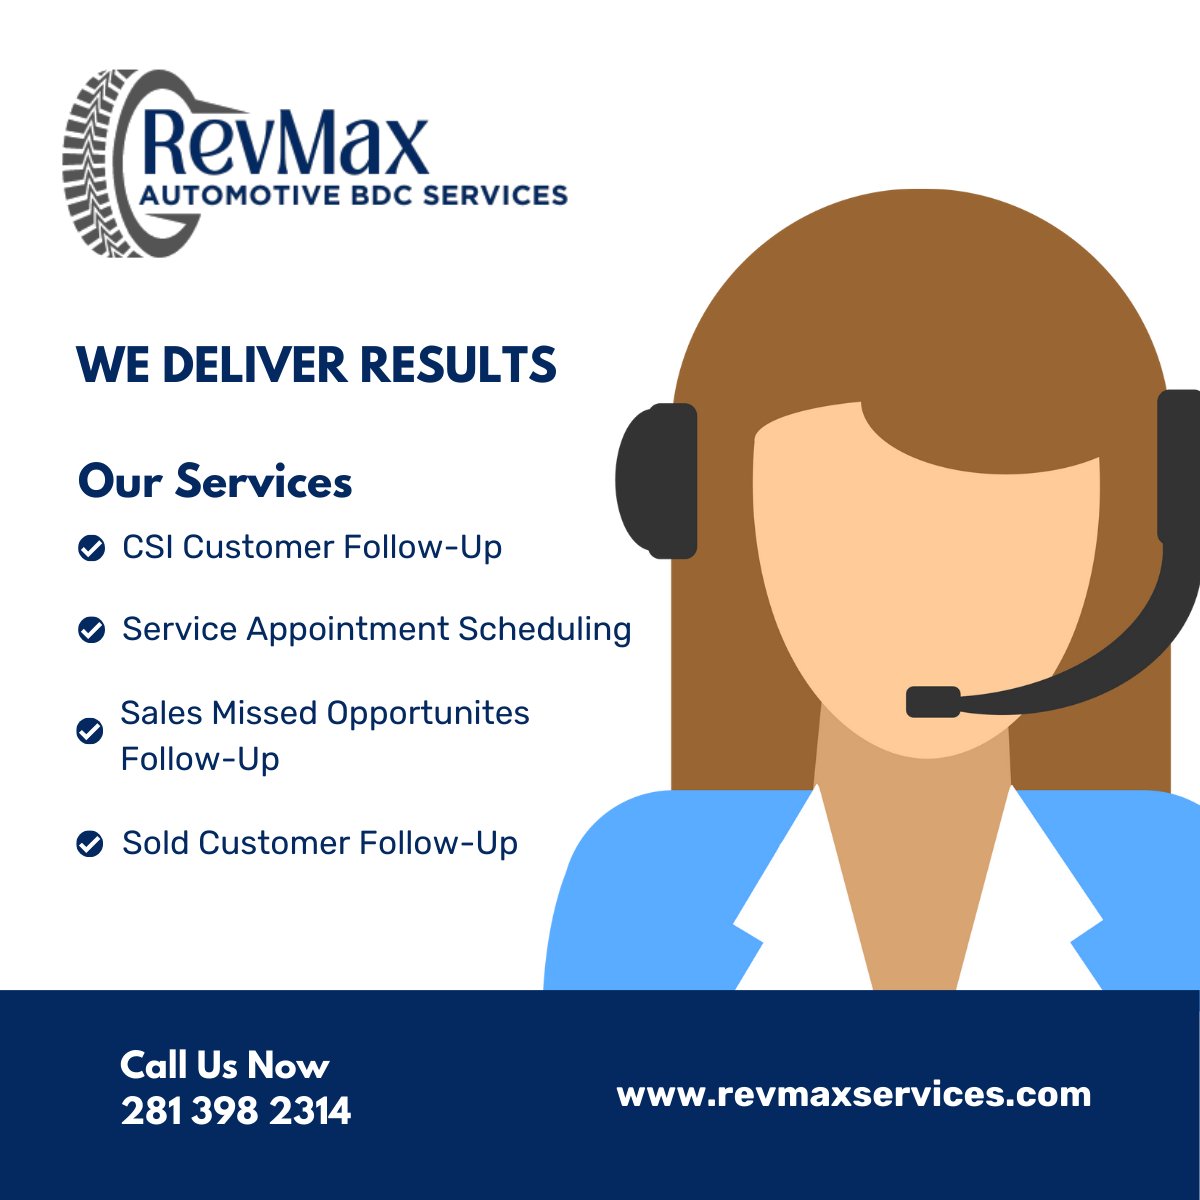 Elevating dealership success through expert BDC services, with FAIR PRICING 🚀✨ From lead conversion to customer engagement, we've got your dealership covered. Discover the RevMax advantage today! #RevMaxBDC #AutomotiveSuccess 🏆🚗
revmaxservices.com